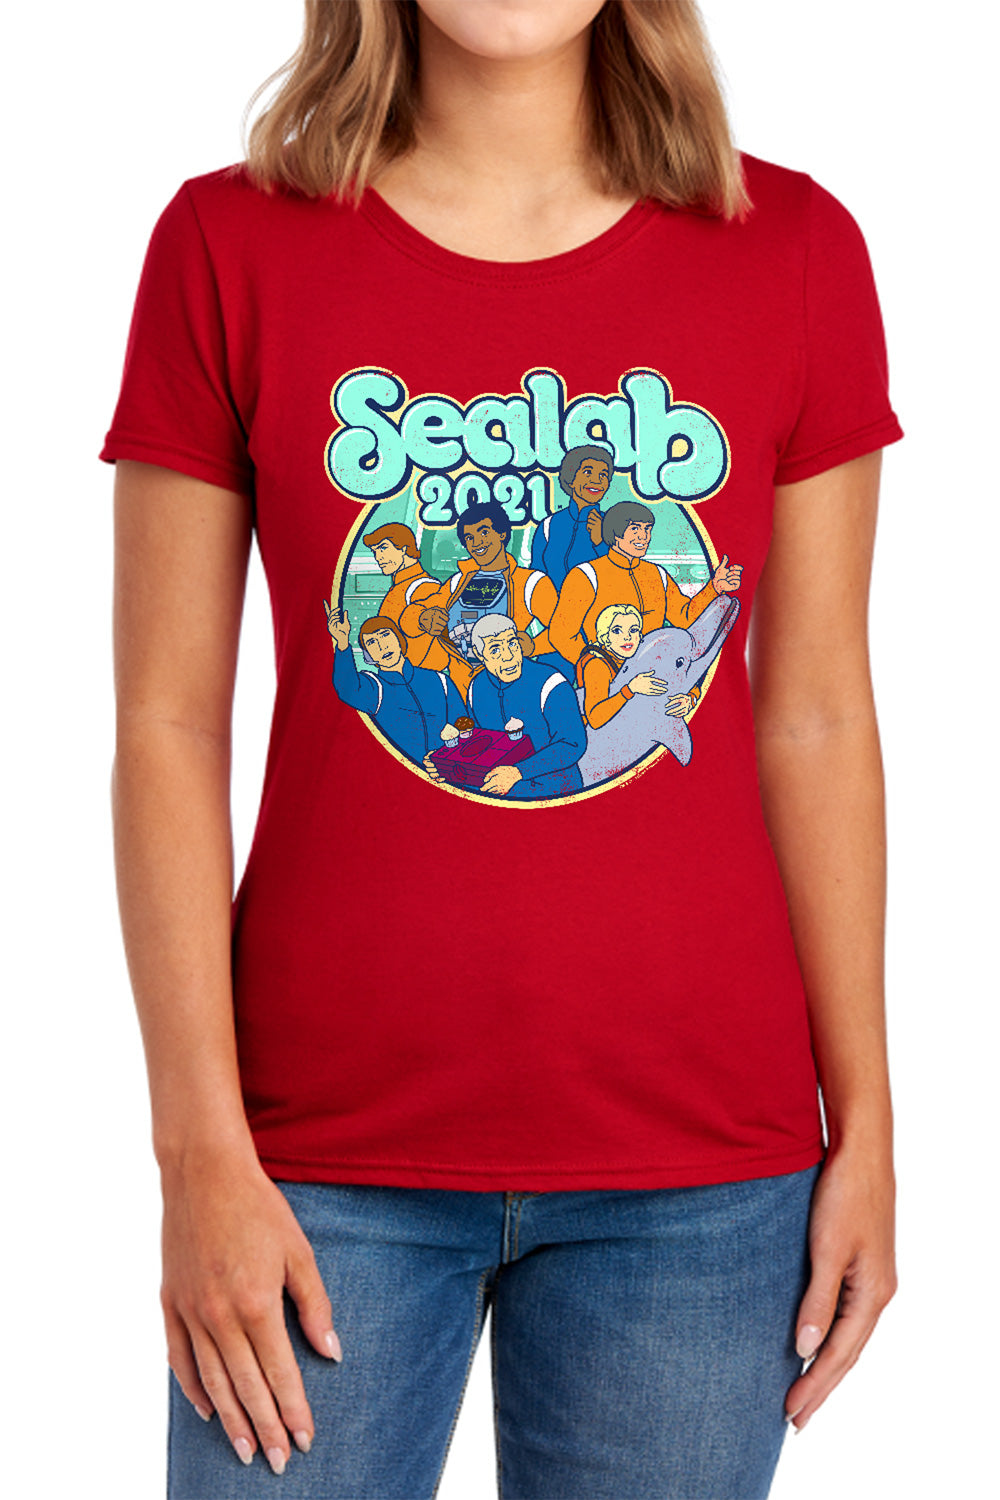 SEALAB 2021 : GANG'S ALL HERE WOMENS SHORT SLEEVE Royal Blue MD